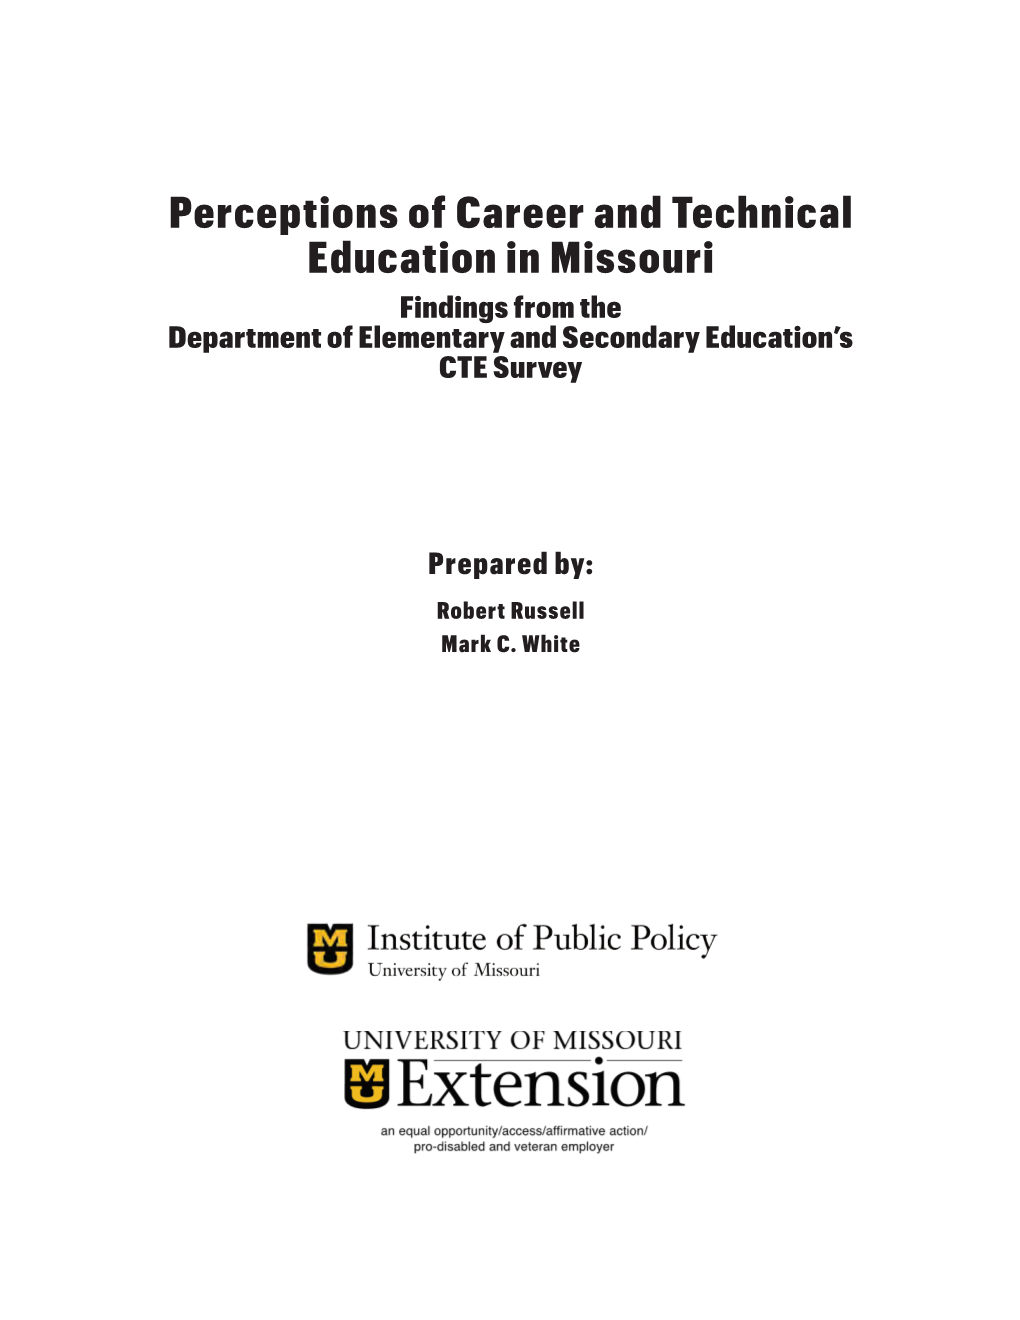 White Paper Perceptions of Career and Technical Education in Missouri